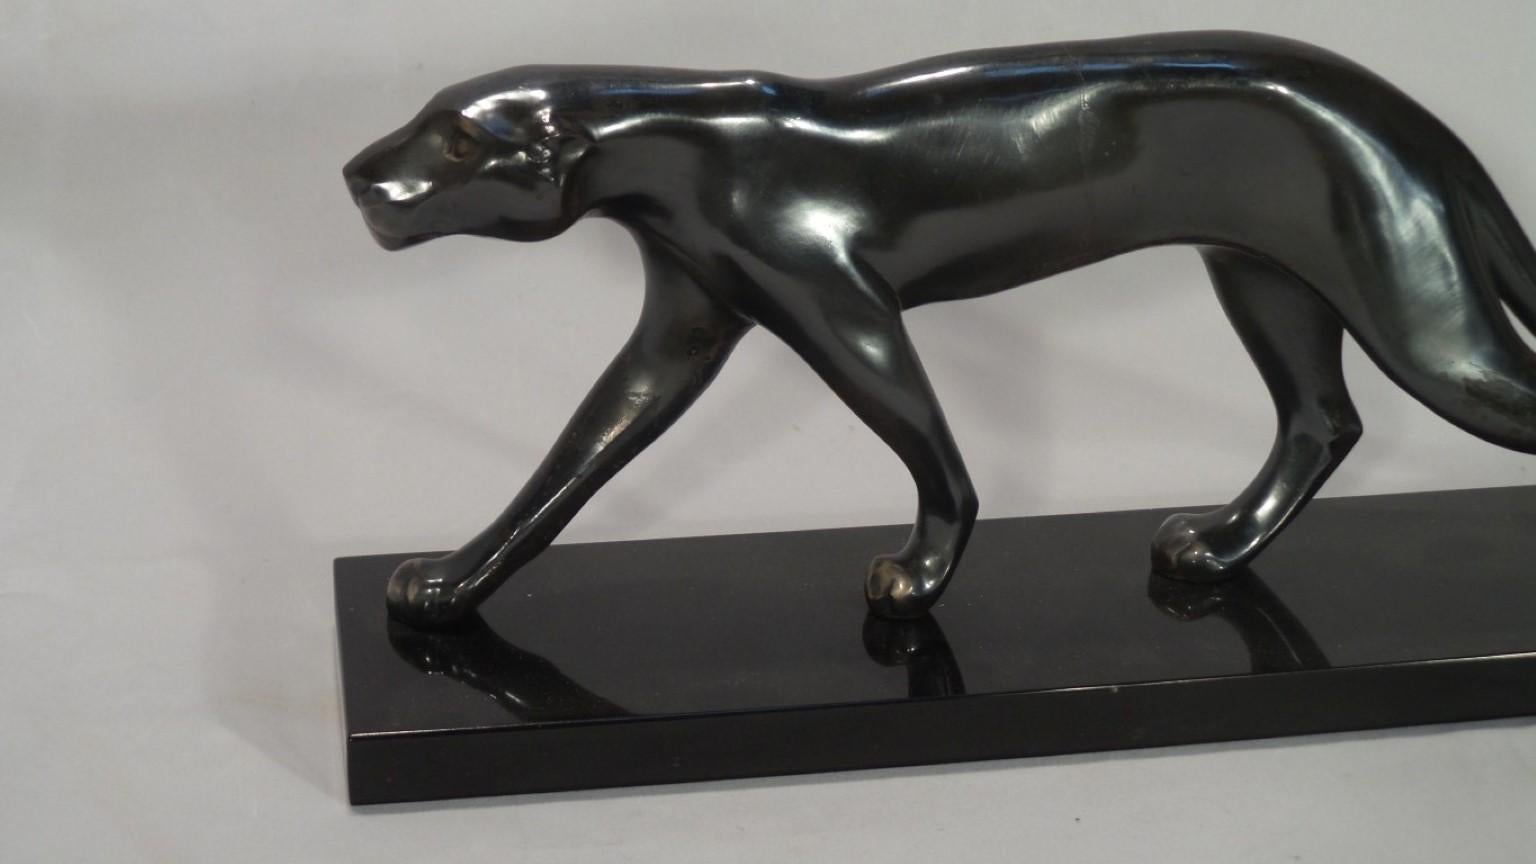 A wonderful Art Deco sculpture dating from circa 1930. The panther is in a burnished metal finish. It is set on a marble base. The sculpture has a powerful image the panther being full of movement and grace
The artist has not signed this piece but